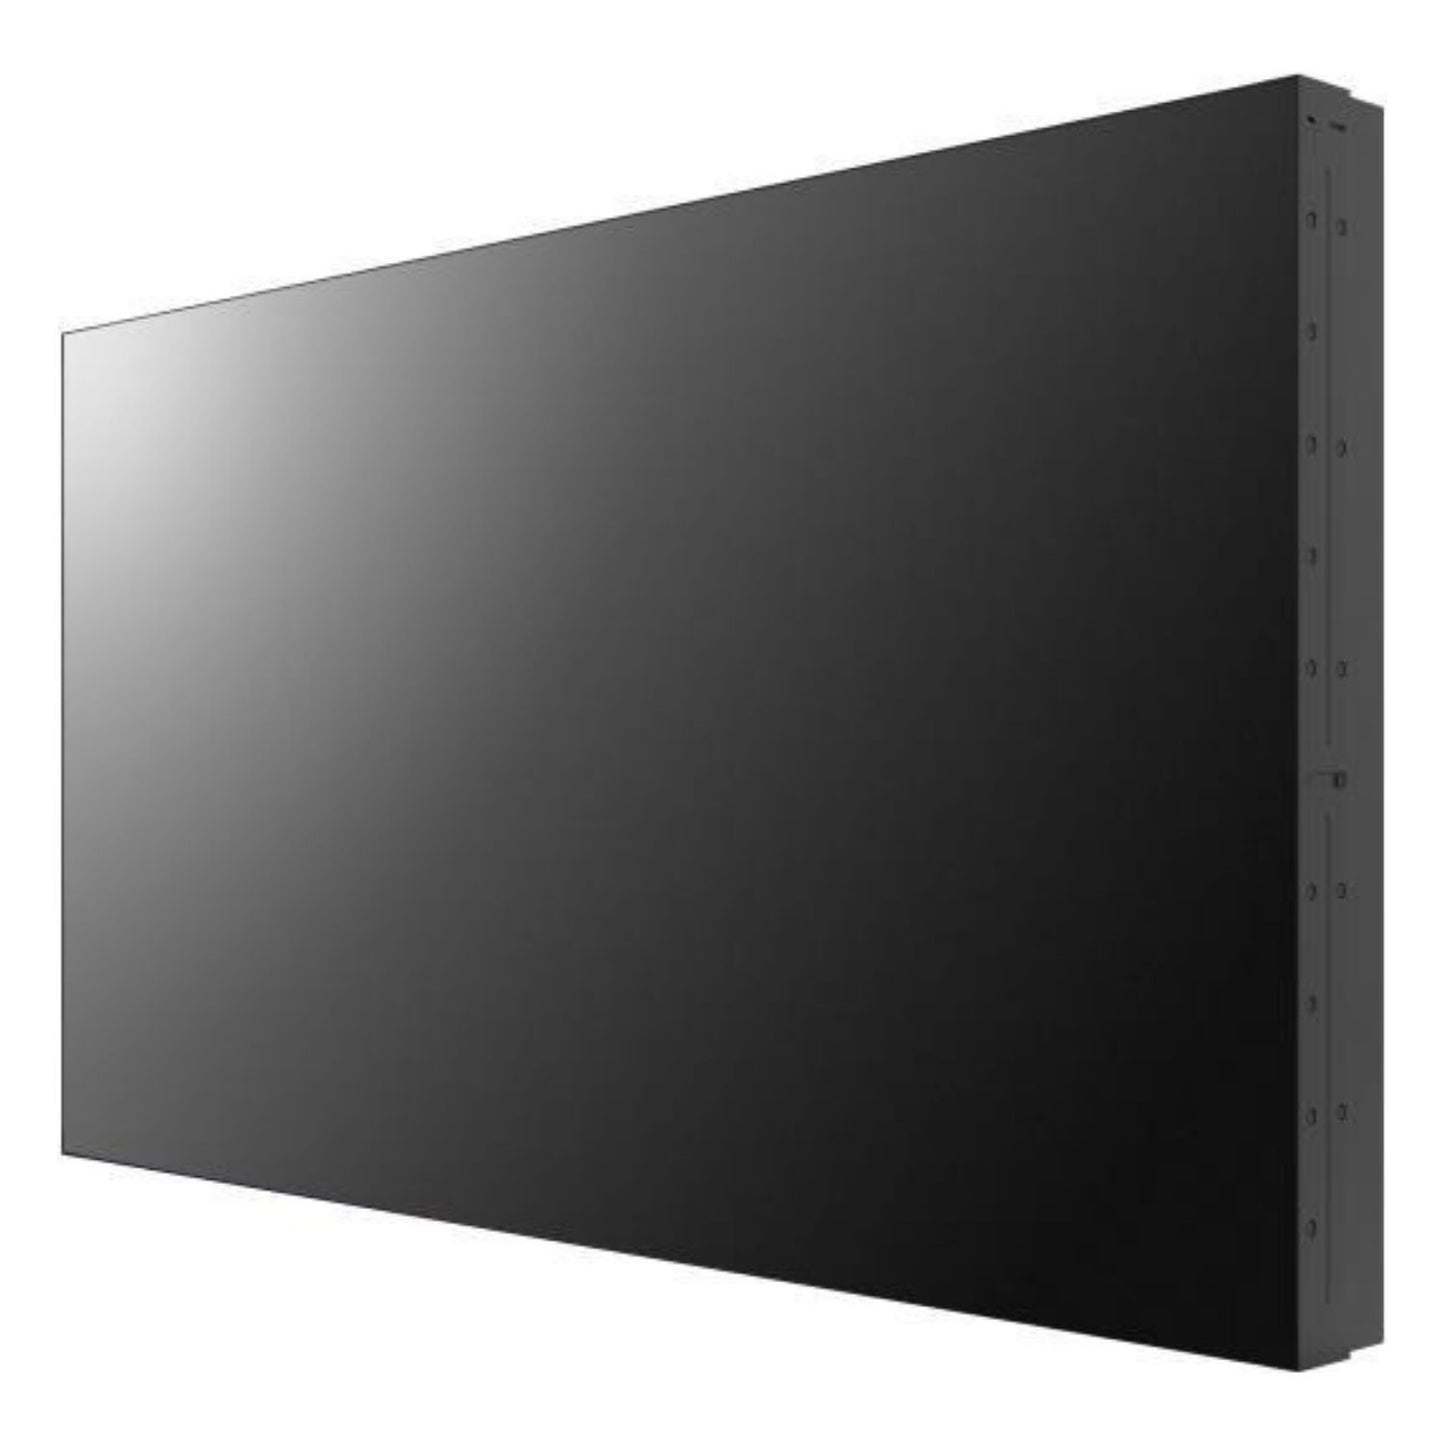 DS-D2055HR-G - 55-inch 0.88mm LCD Display Unit